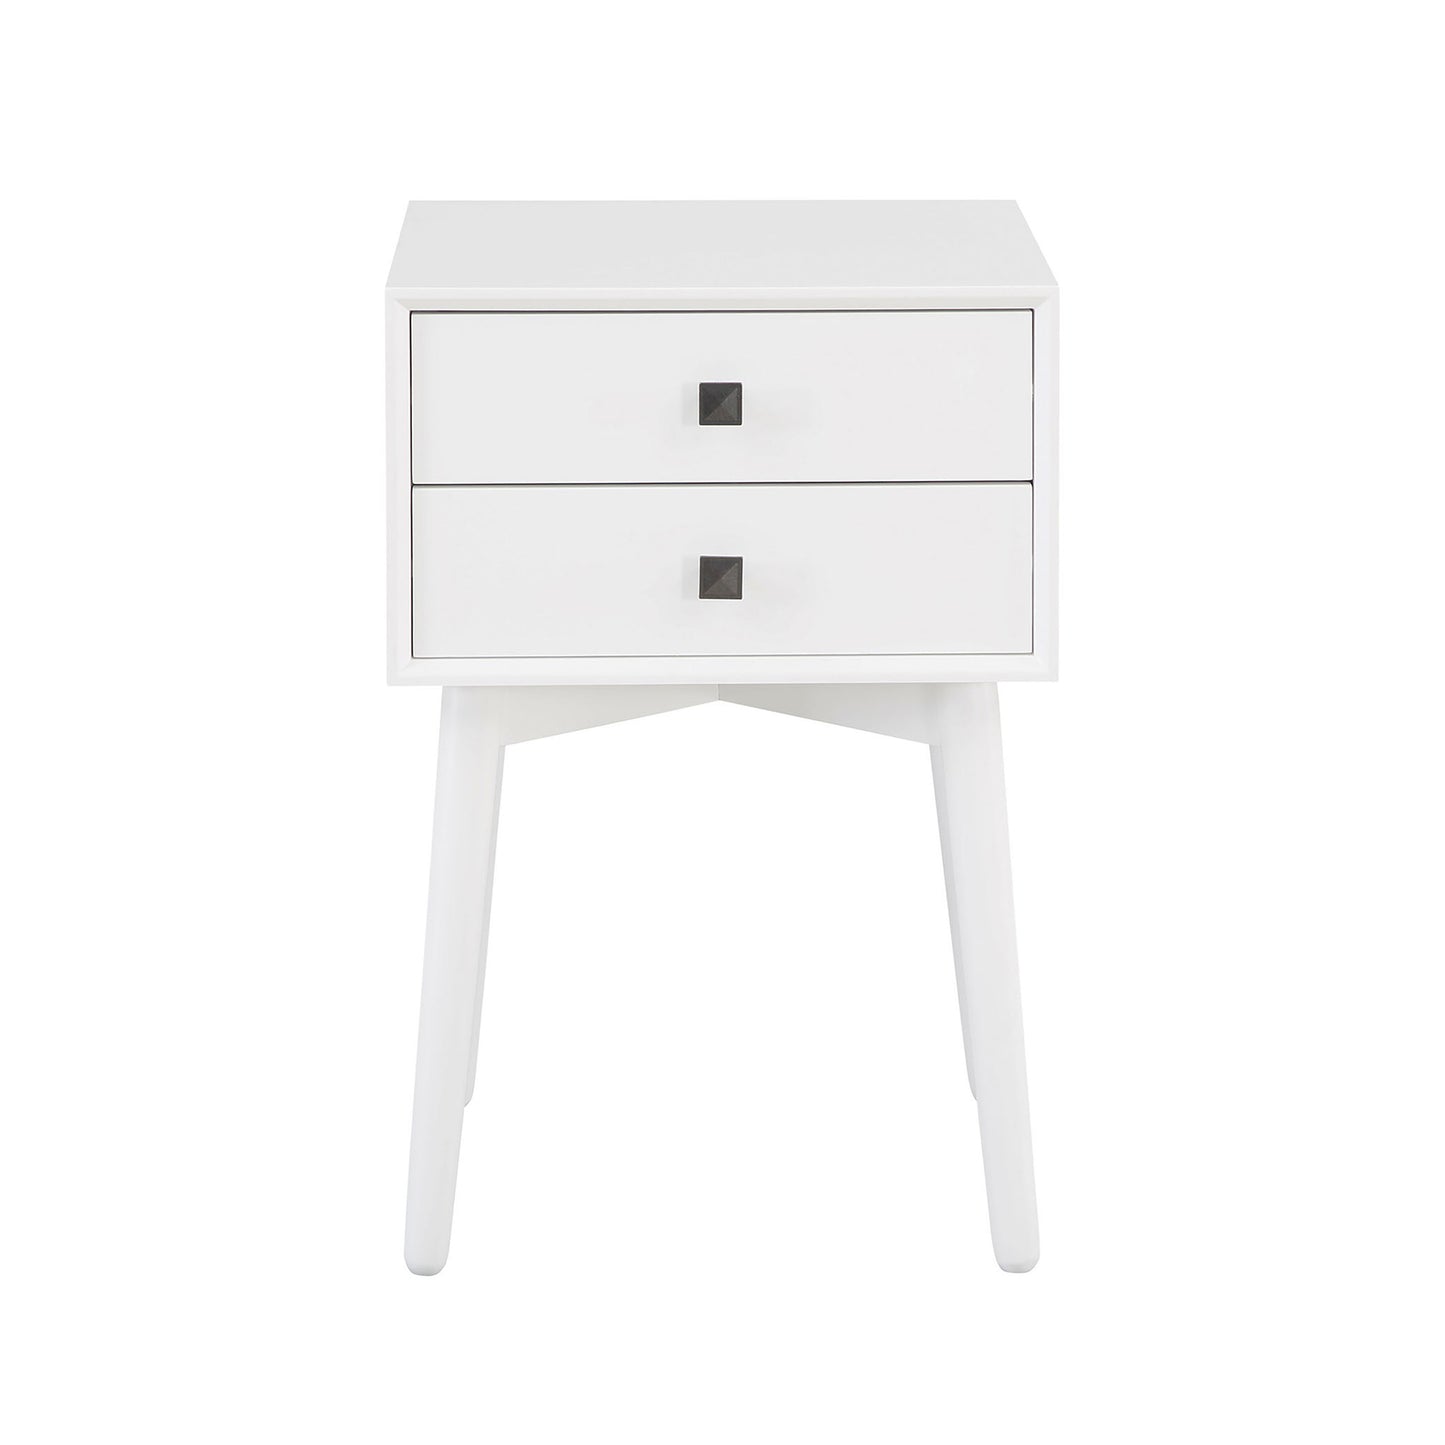 Front-facing modern white two-drawer compact nightstand with splayed legs on a white background